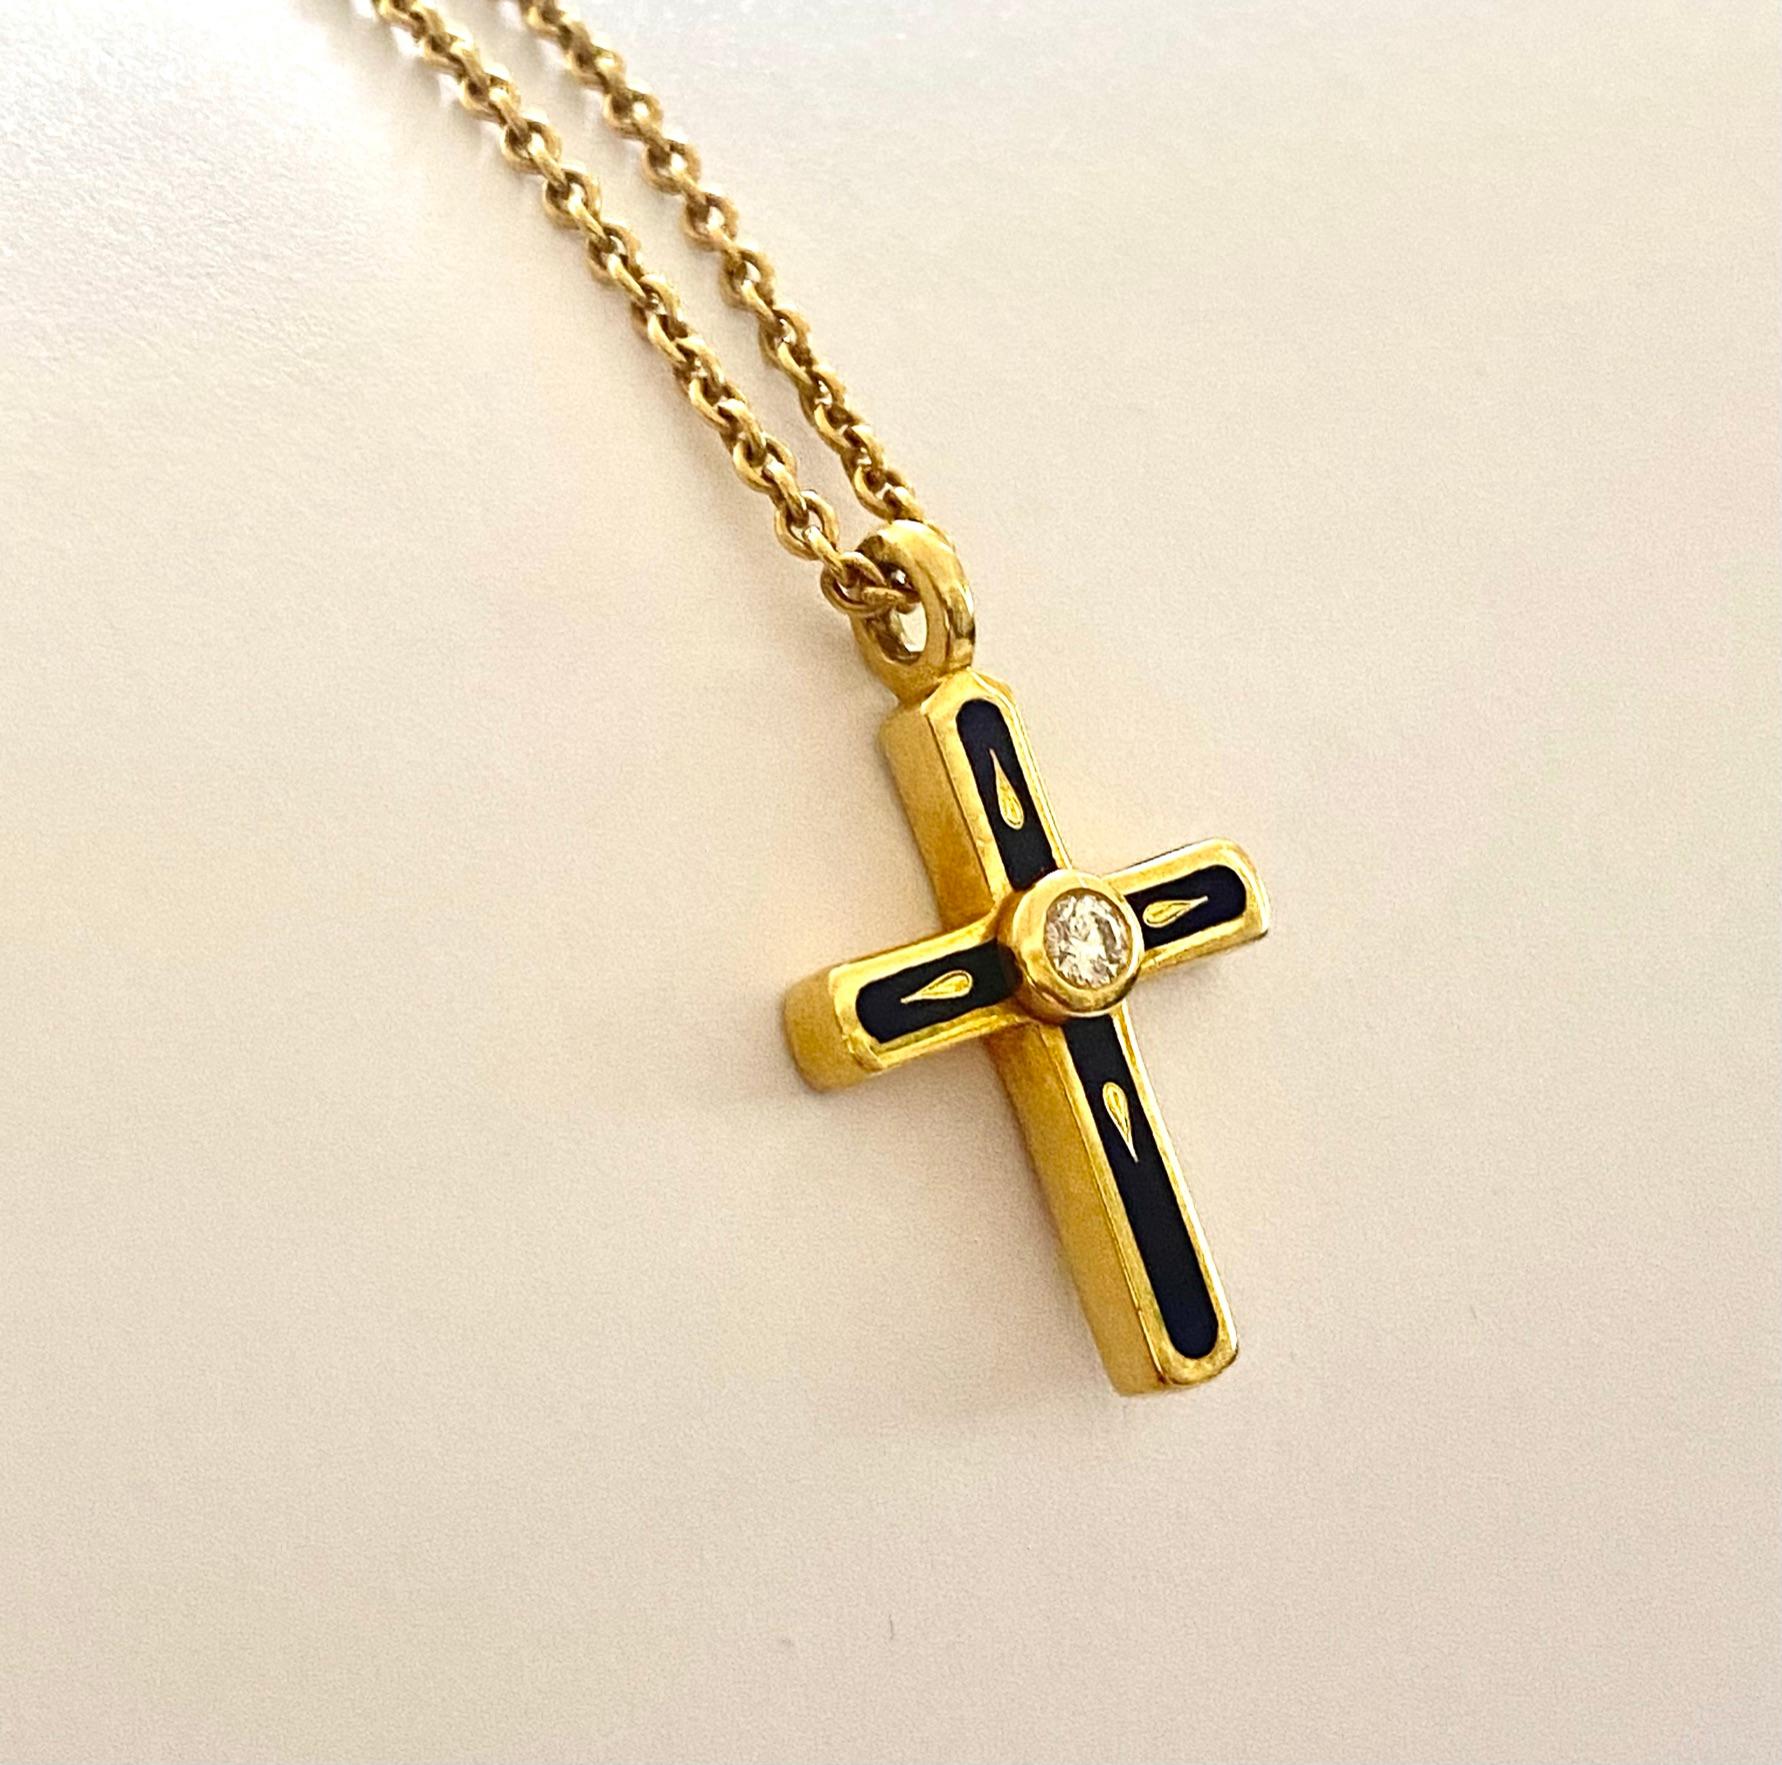 An 18K. yellow gold cross with blue enamel and a brilliant cut diamond,
signed: Fabergë
maker's mark: Victor Mayer Germany ca 2000
A yellow gold necklace with a length of 46 cm. (signed: Fabergë)
This jewel comes with the original wooden Fabergé box